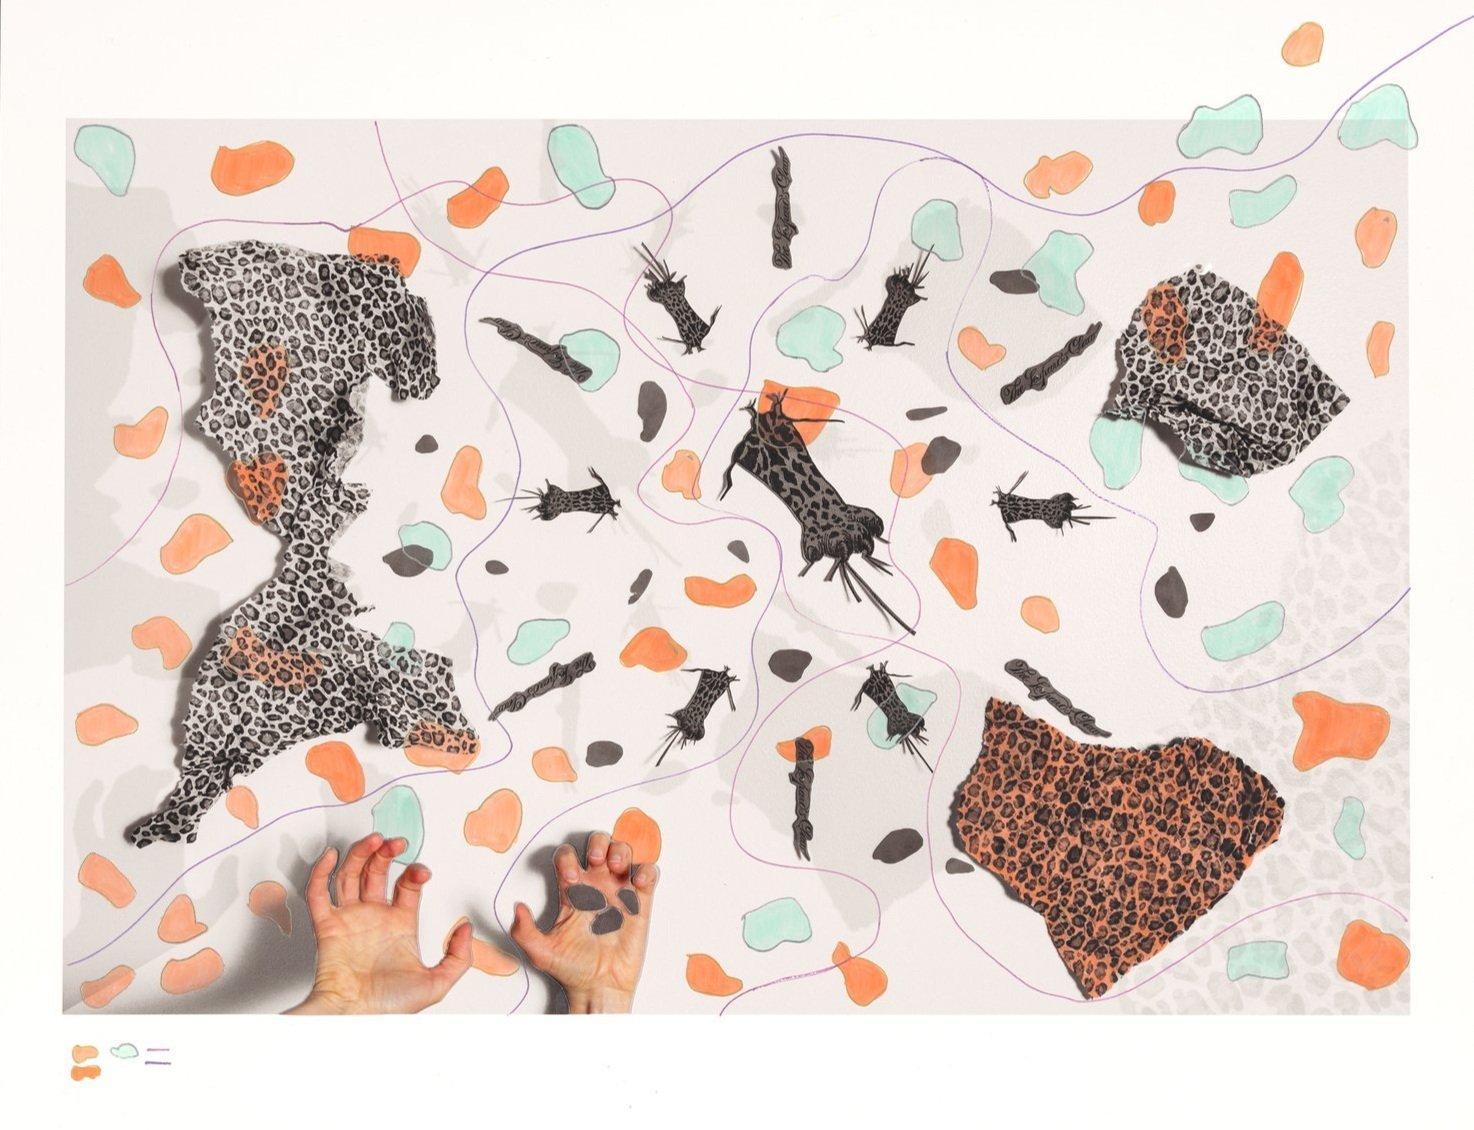 Leopard Tracks (hand colored), by Meredith Miller